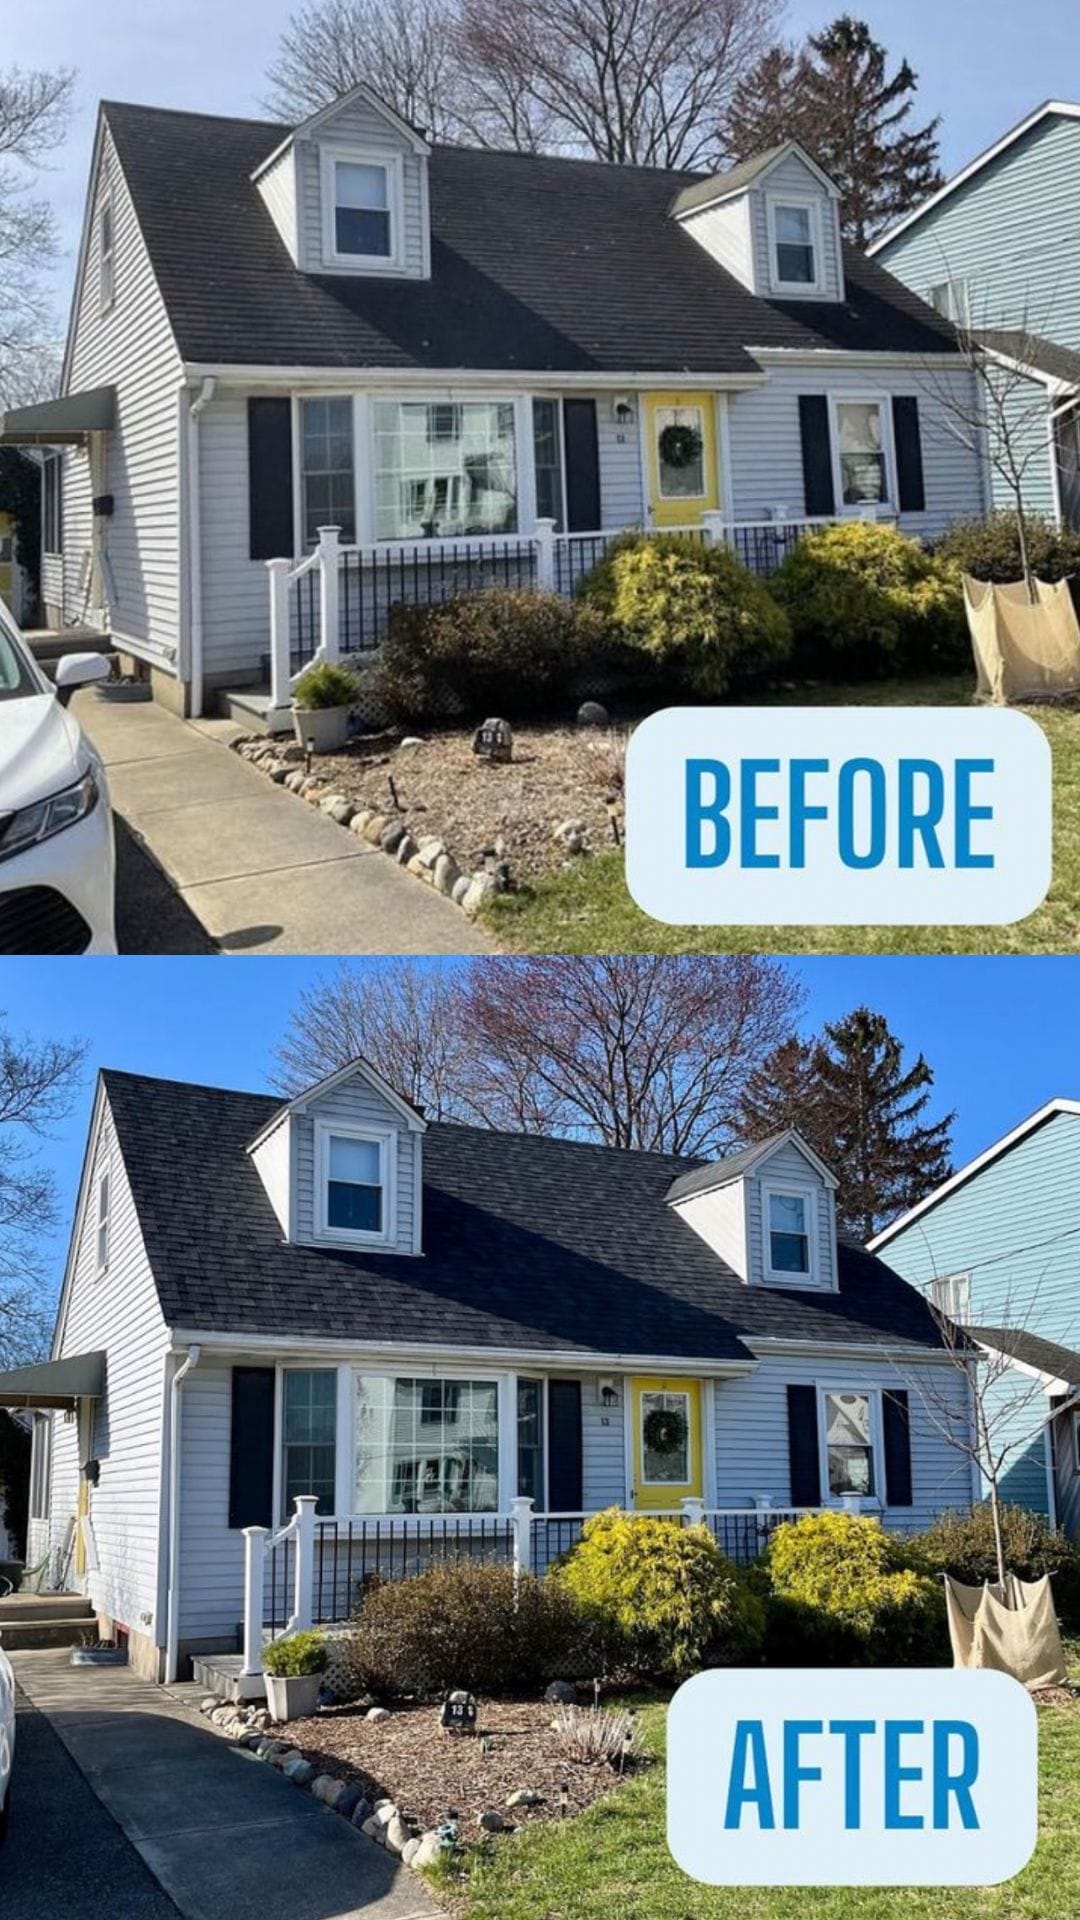 Before & After: Owens Corning Onyx Black Shingles on a Home in Riverdale, NJ